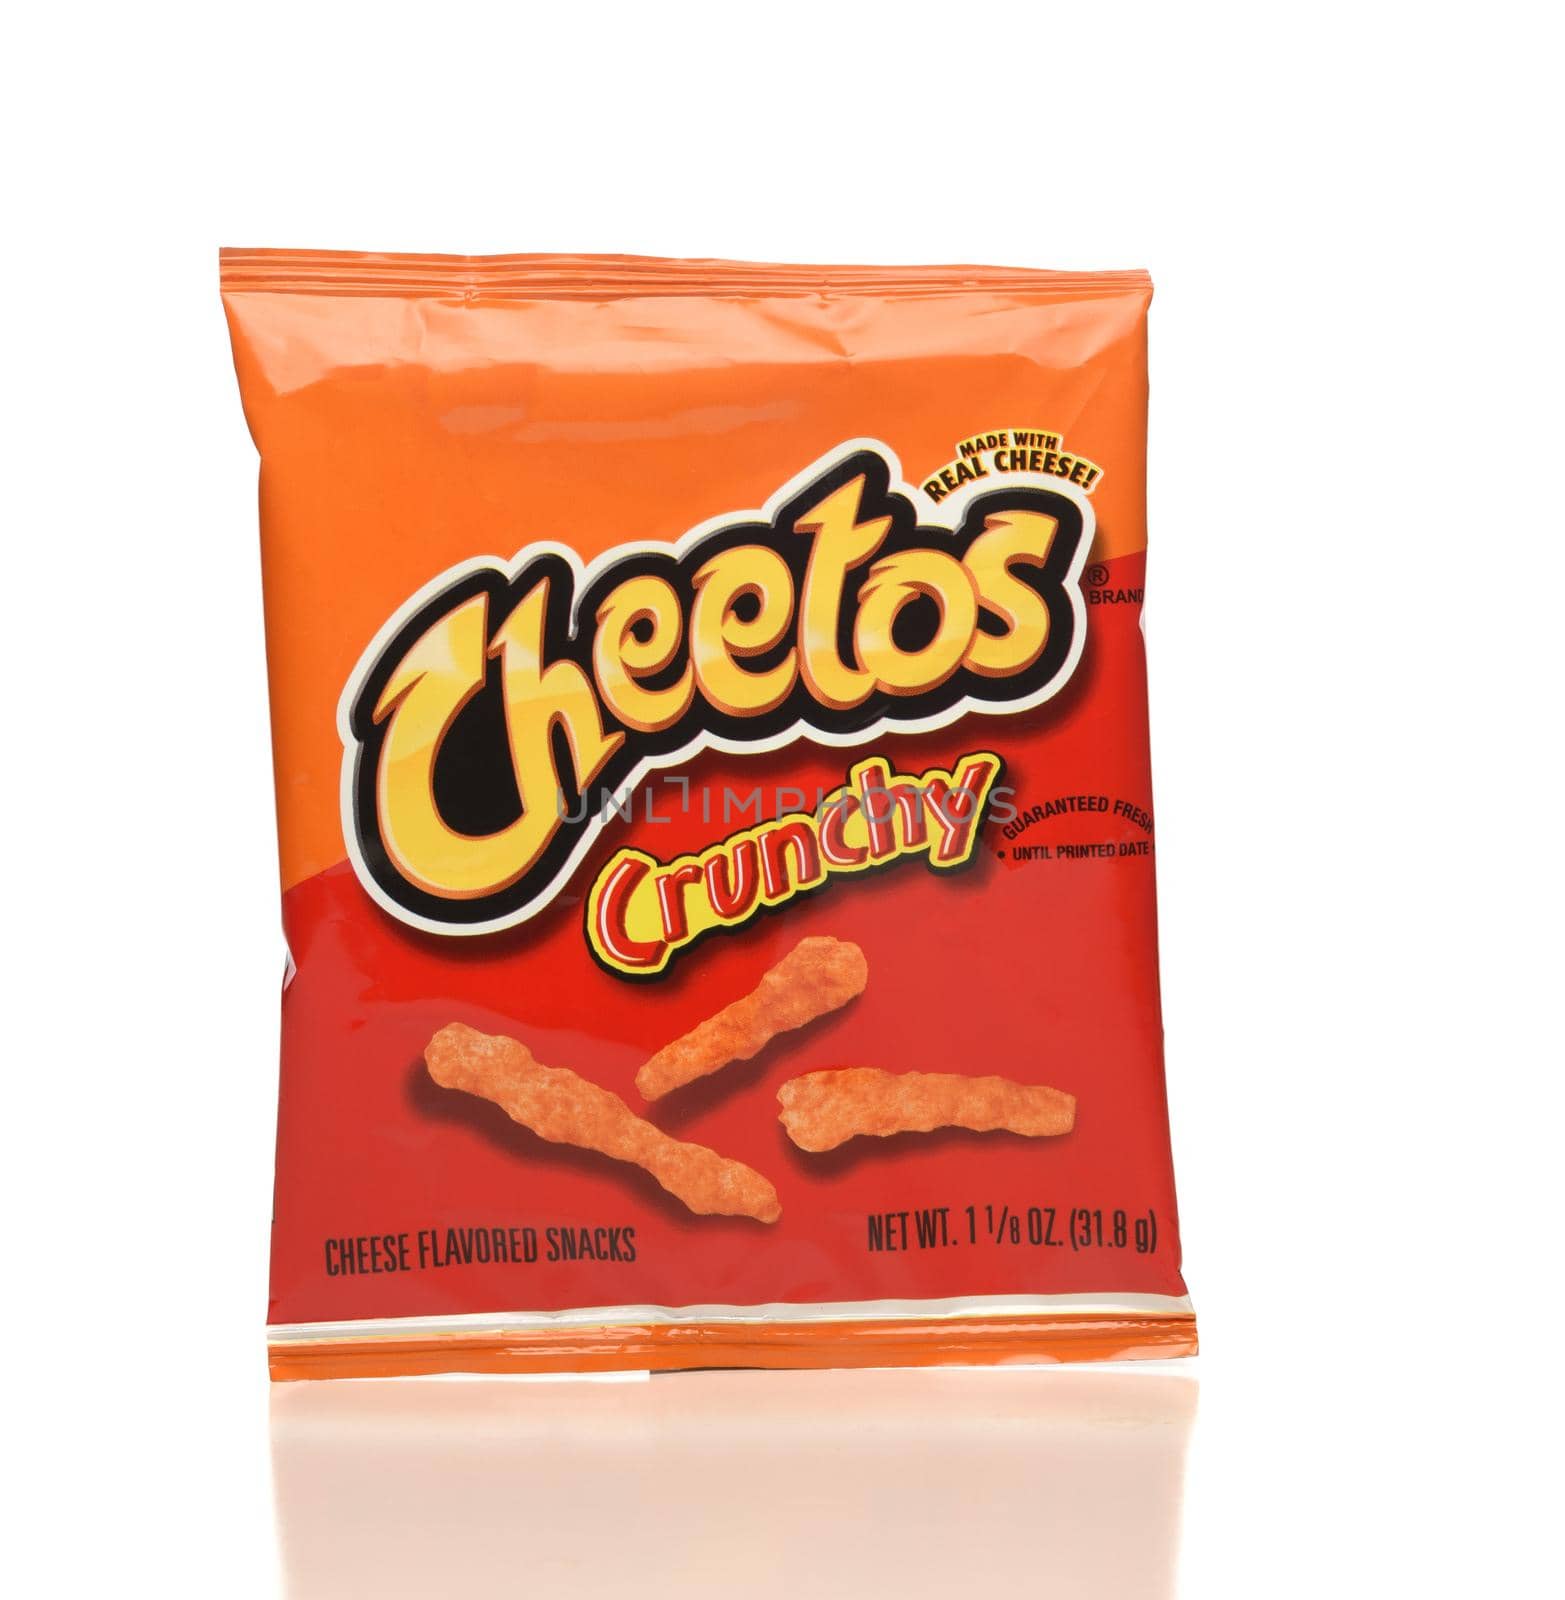 A package of Cheetos cheese flavored puff corn snack, from Frito-Lay by sCukrov